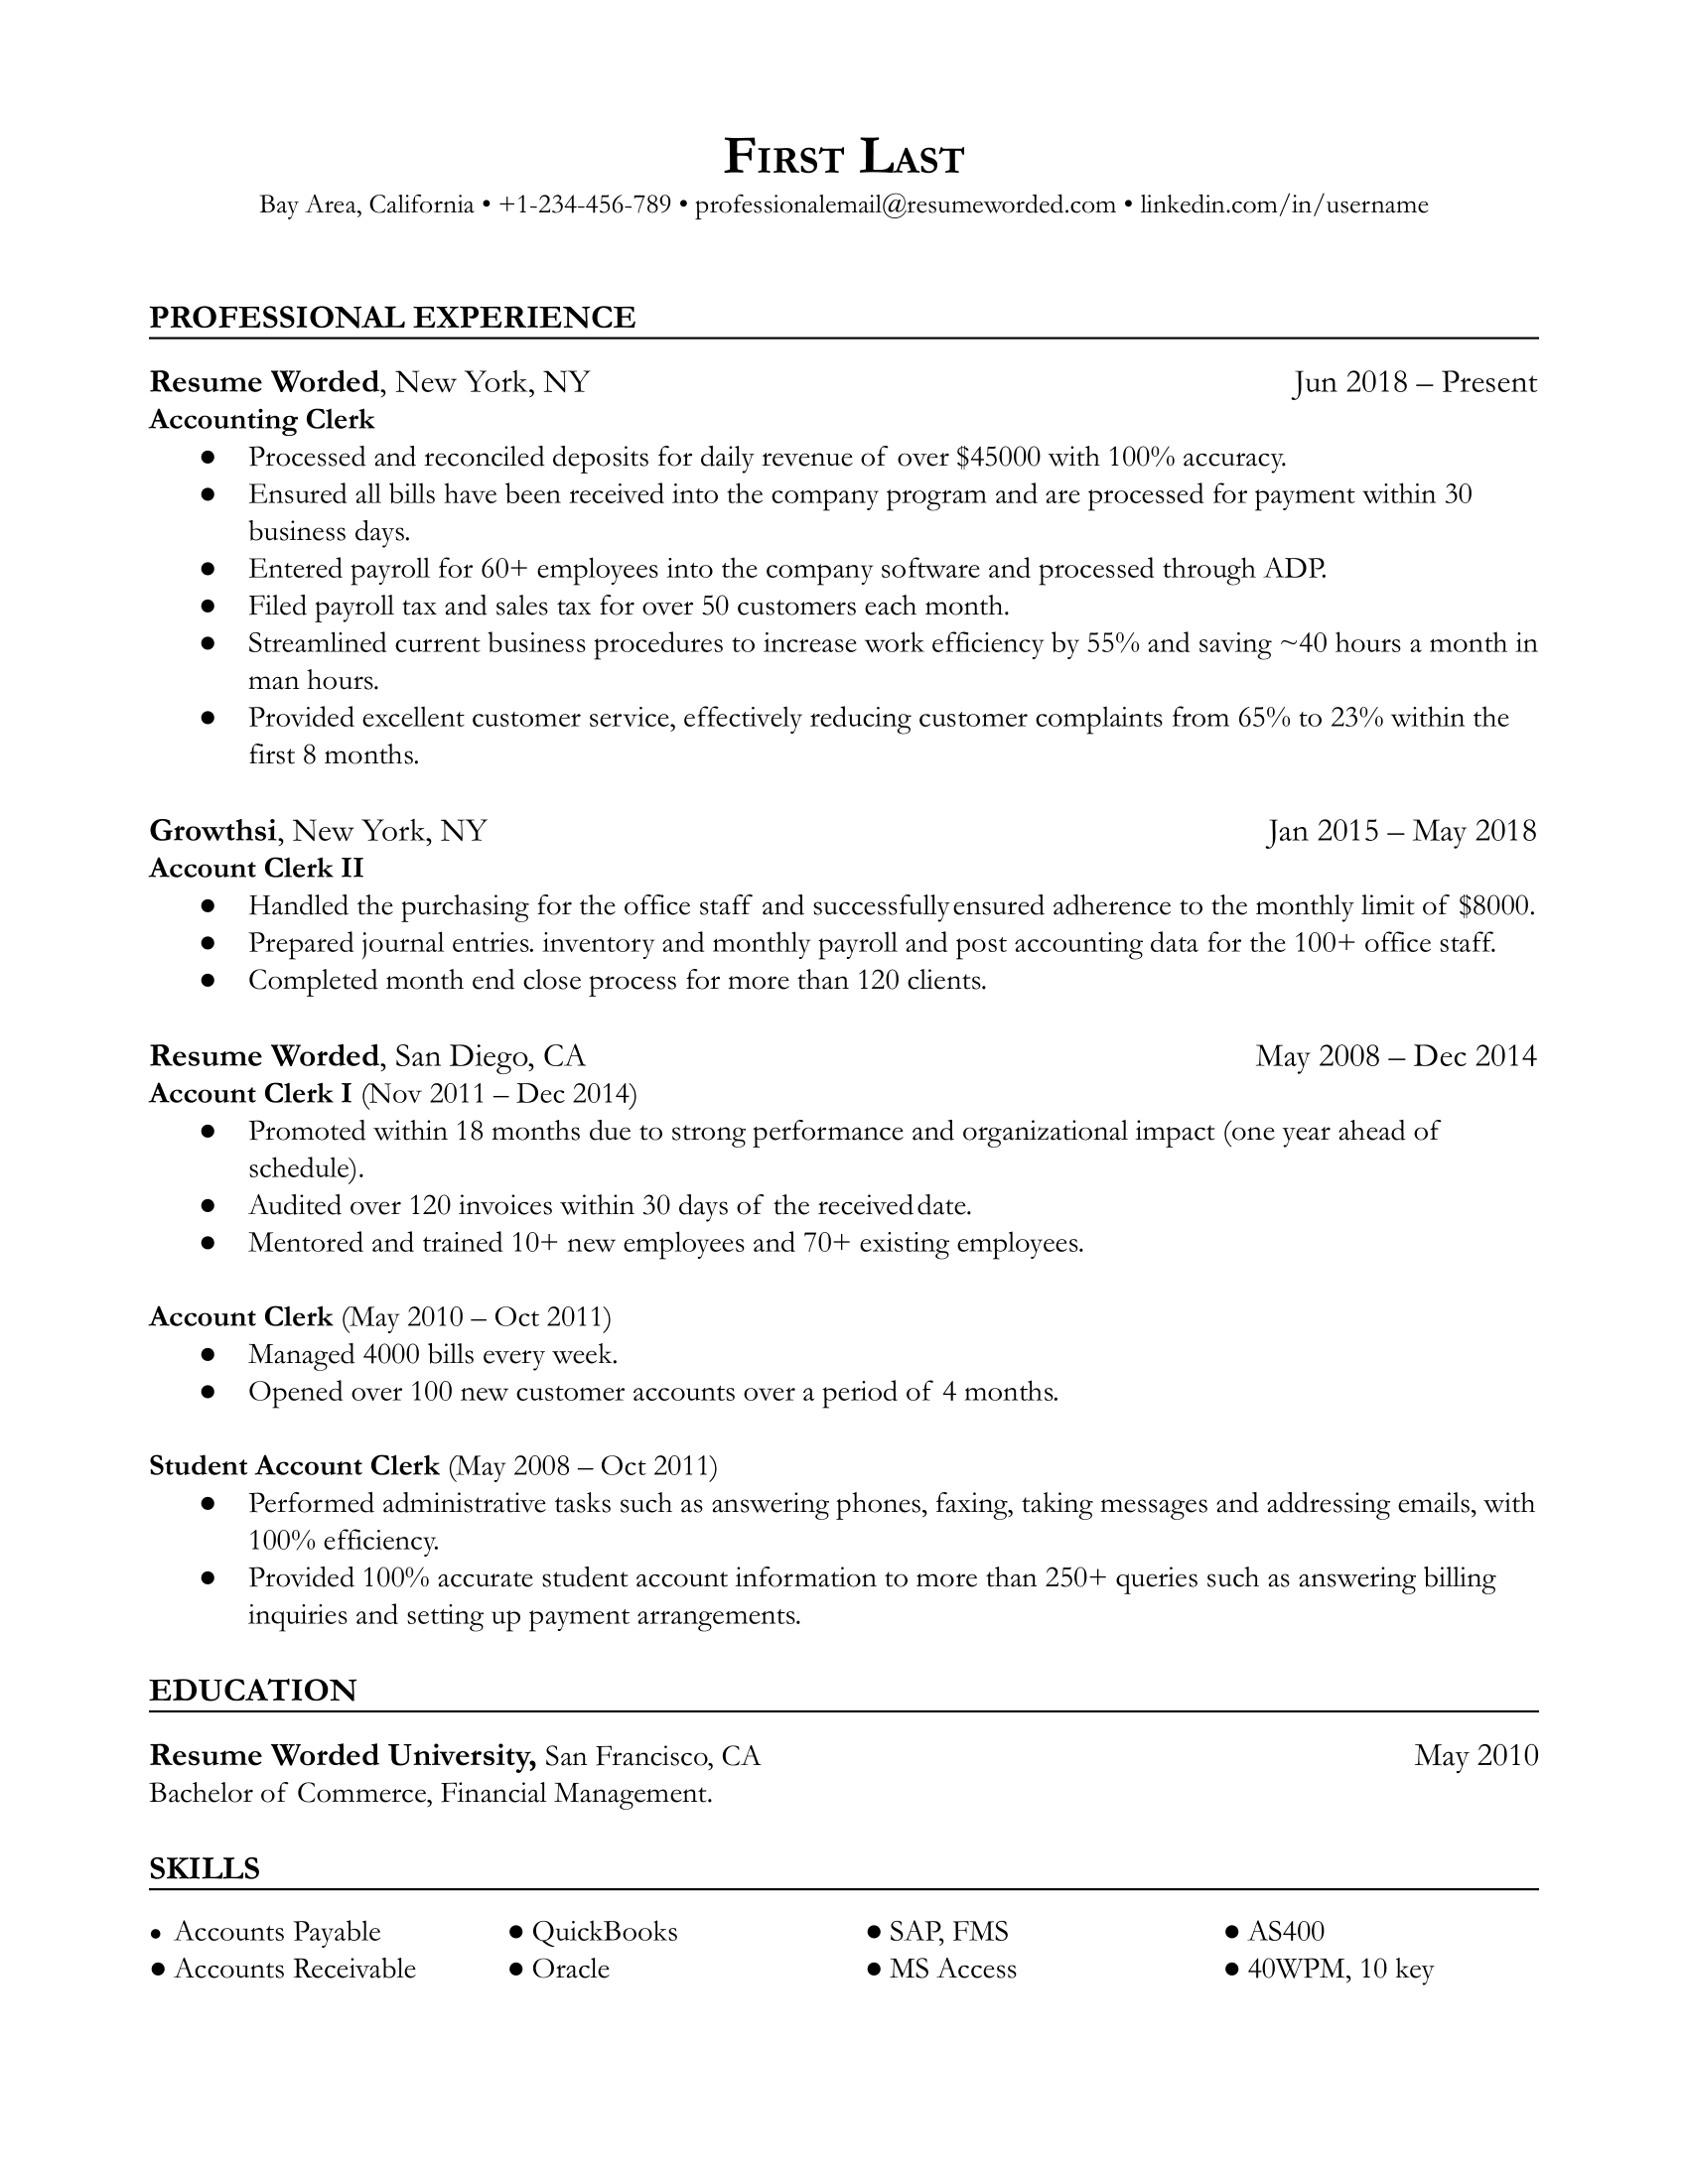 A resume for a accounting clerk with a bachelor's degree in financial management and previous experience as an account clerk.